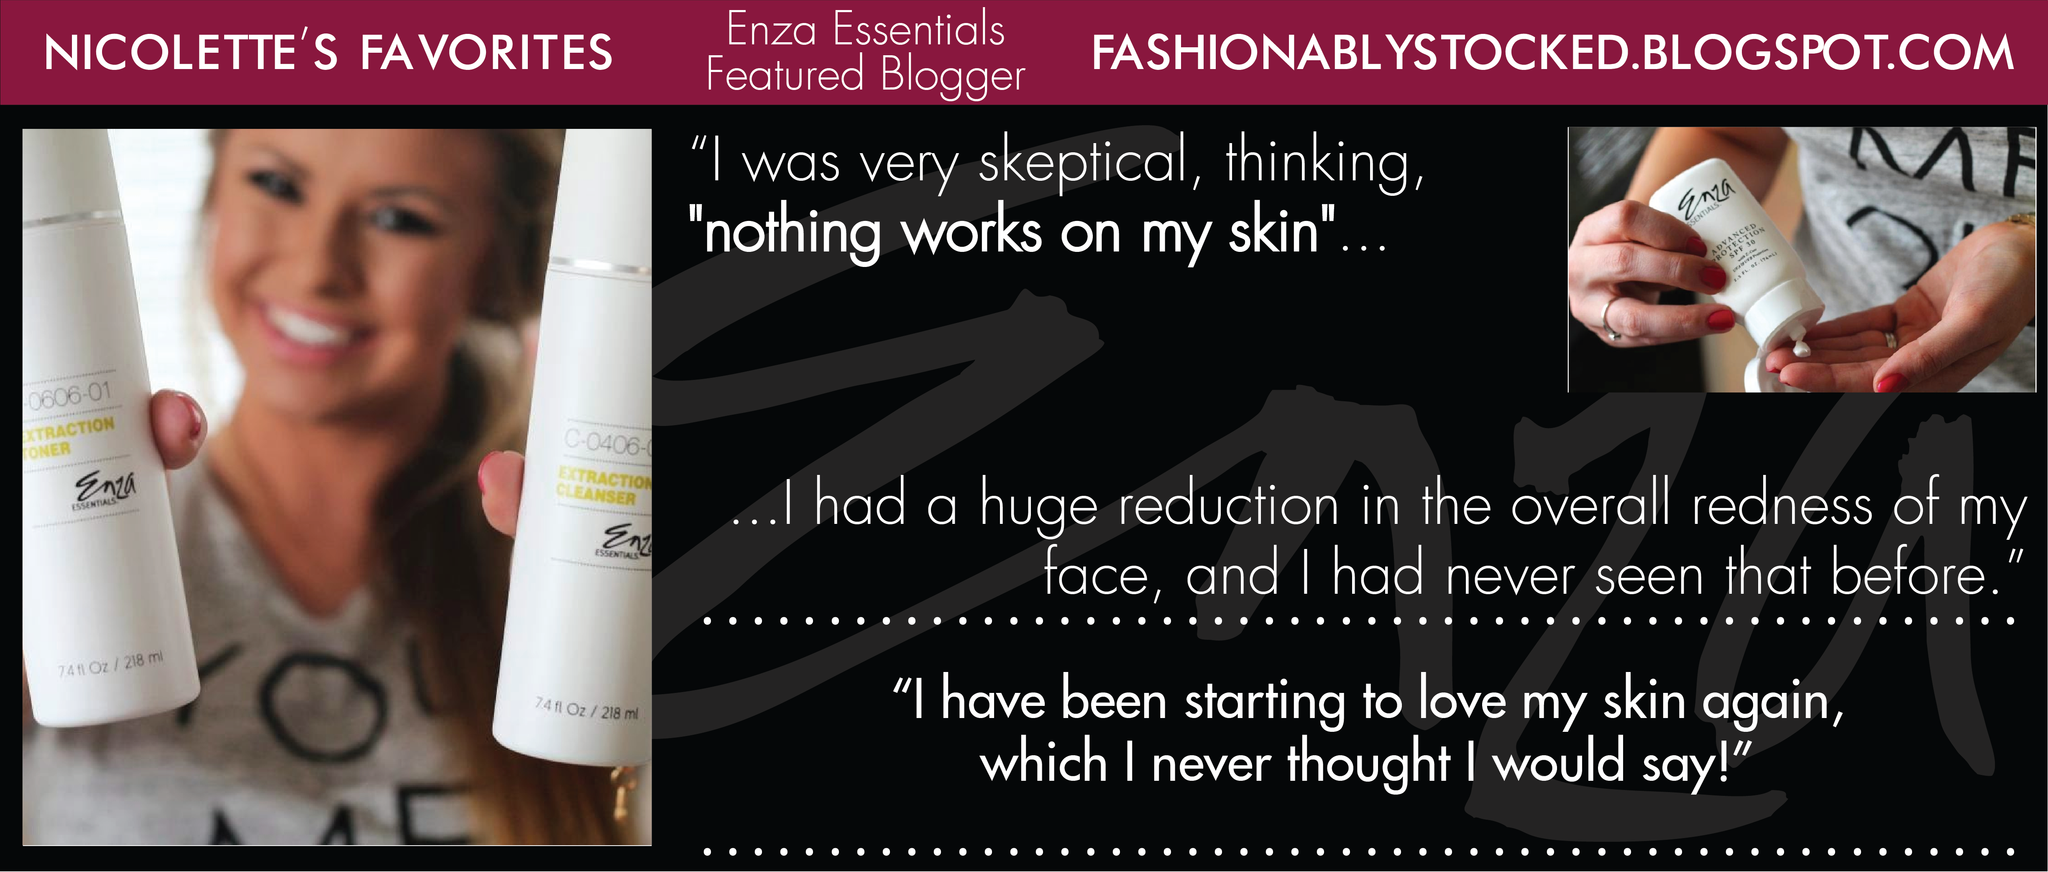 Enza Essentials Featured Blogger Nicolette Fashionably Stocked